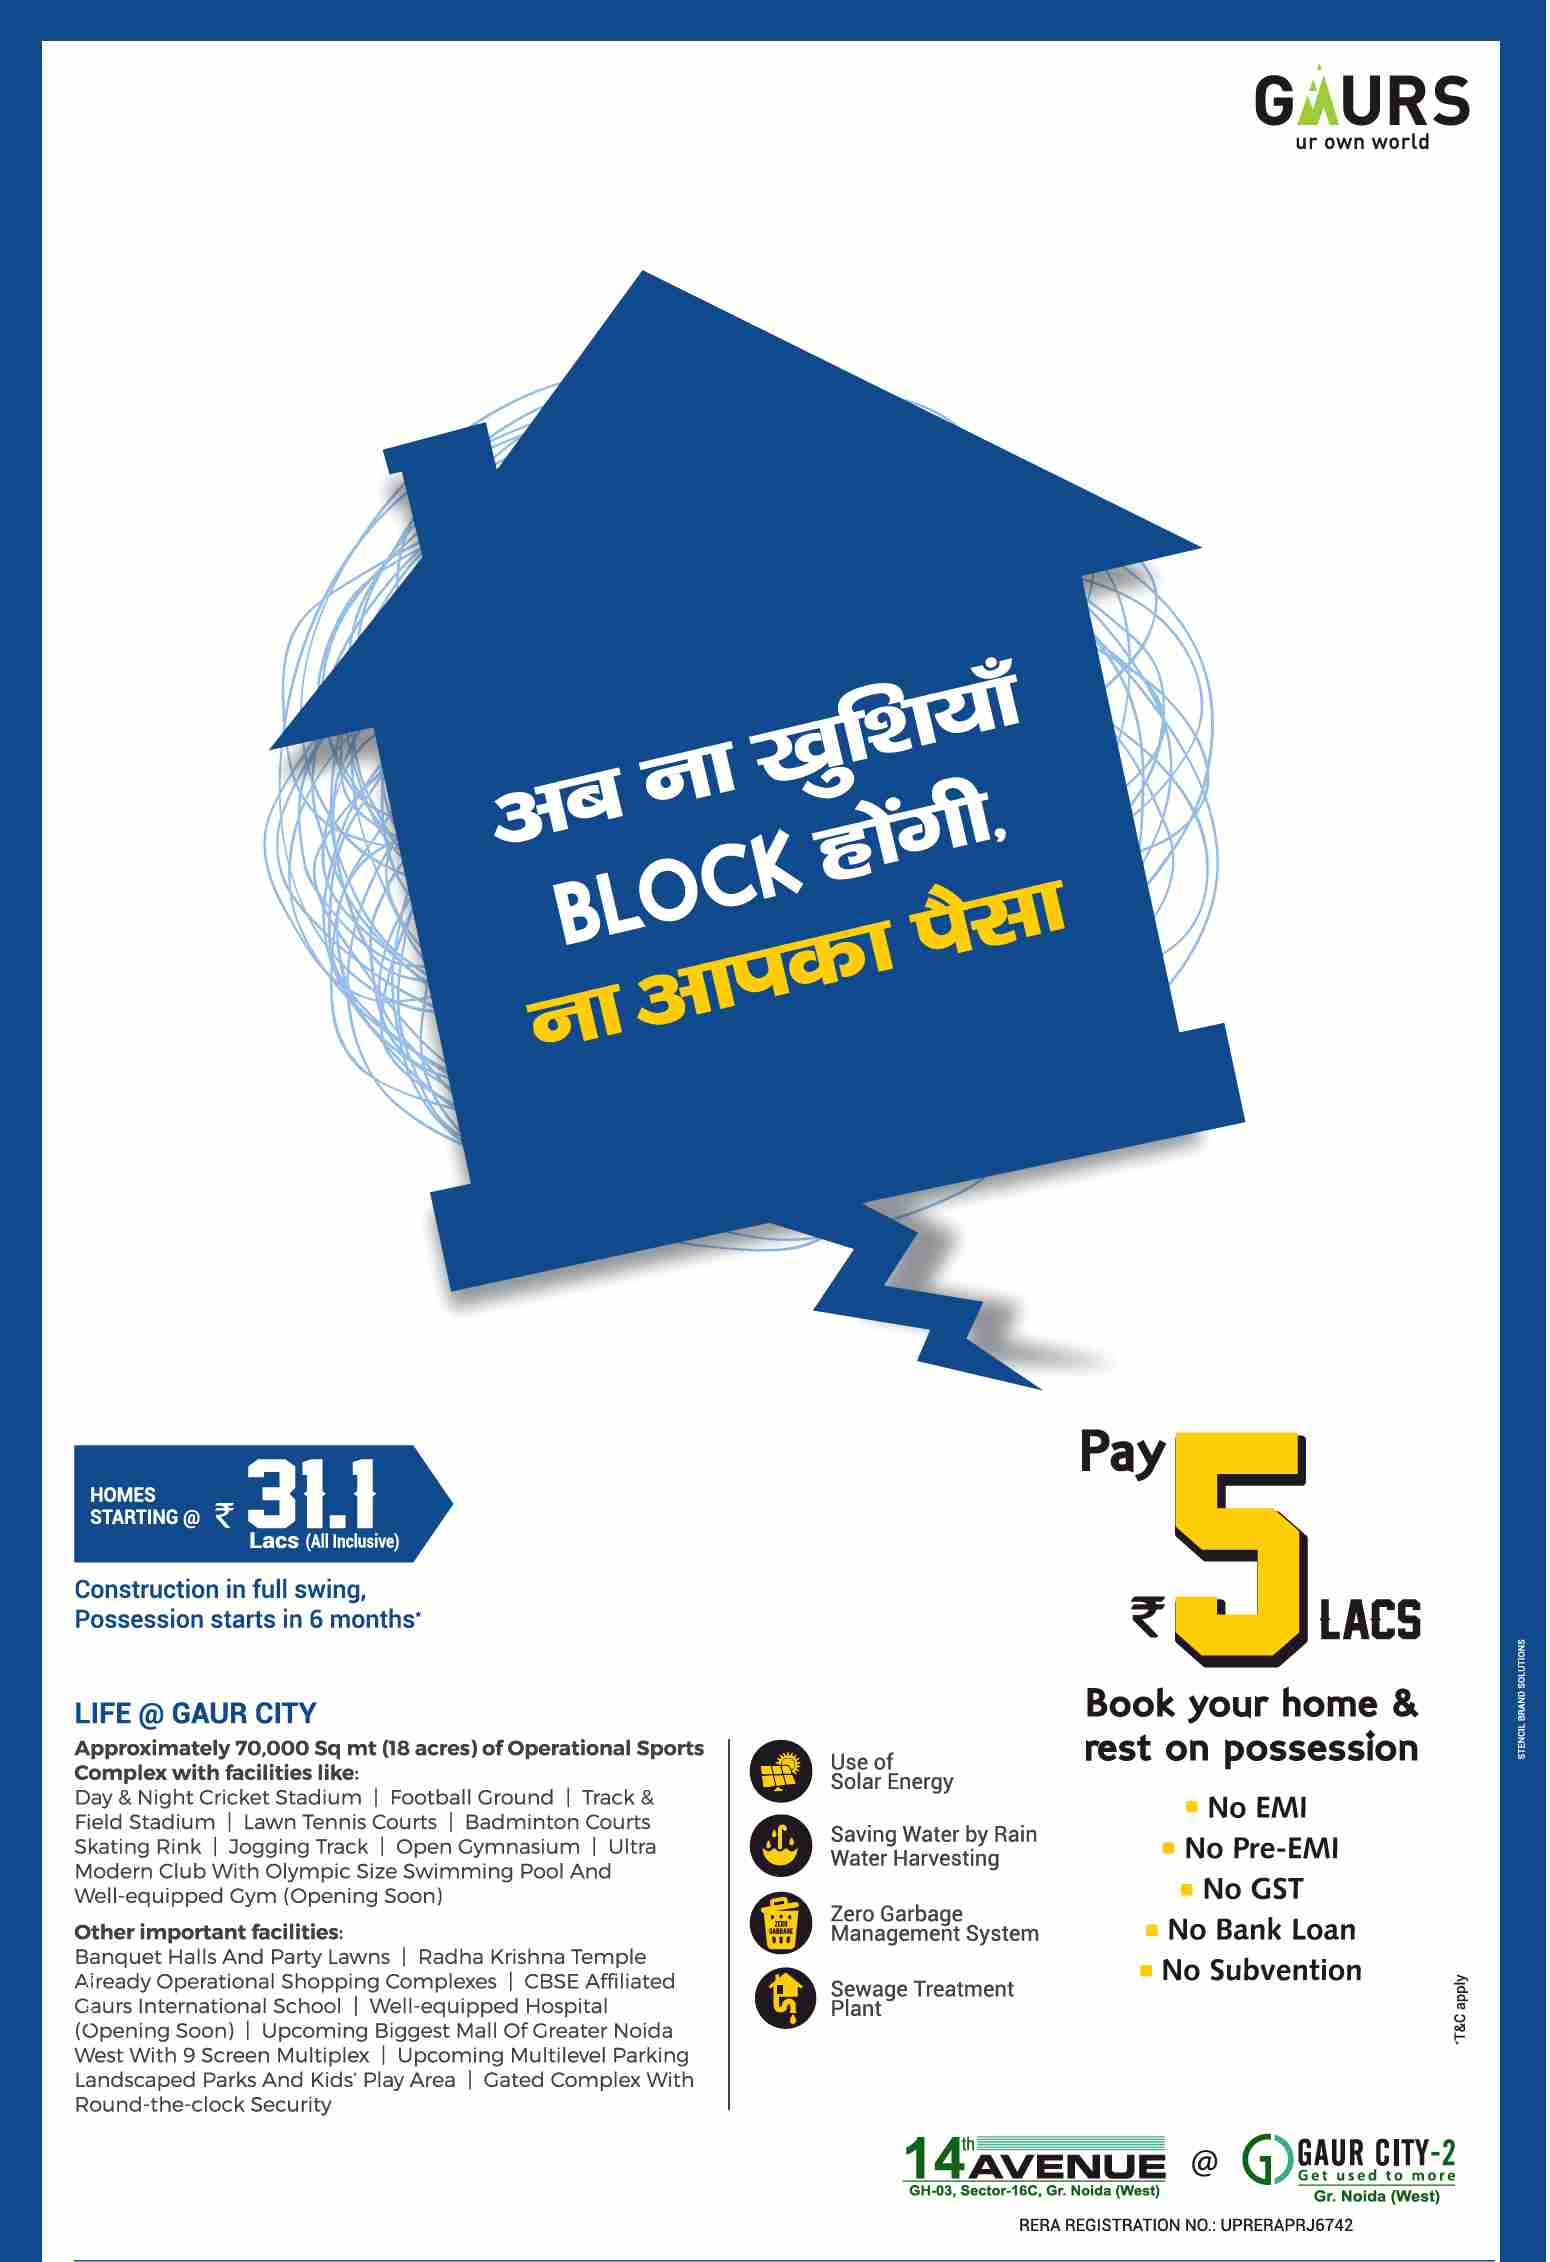 Book your home by paying Rs. 5 Lacs & rest on possession at Gaur City in Greater Noida